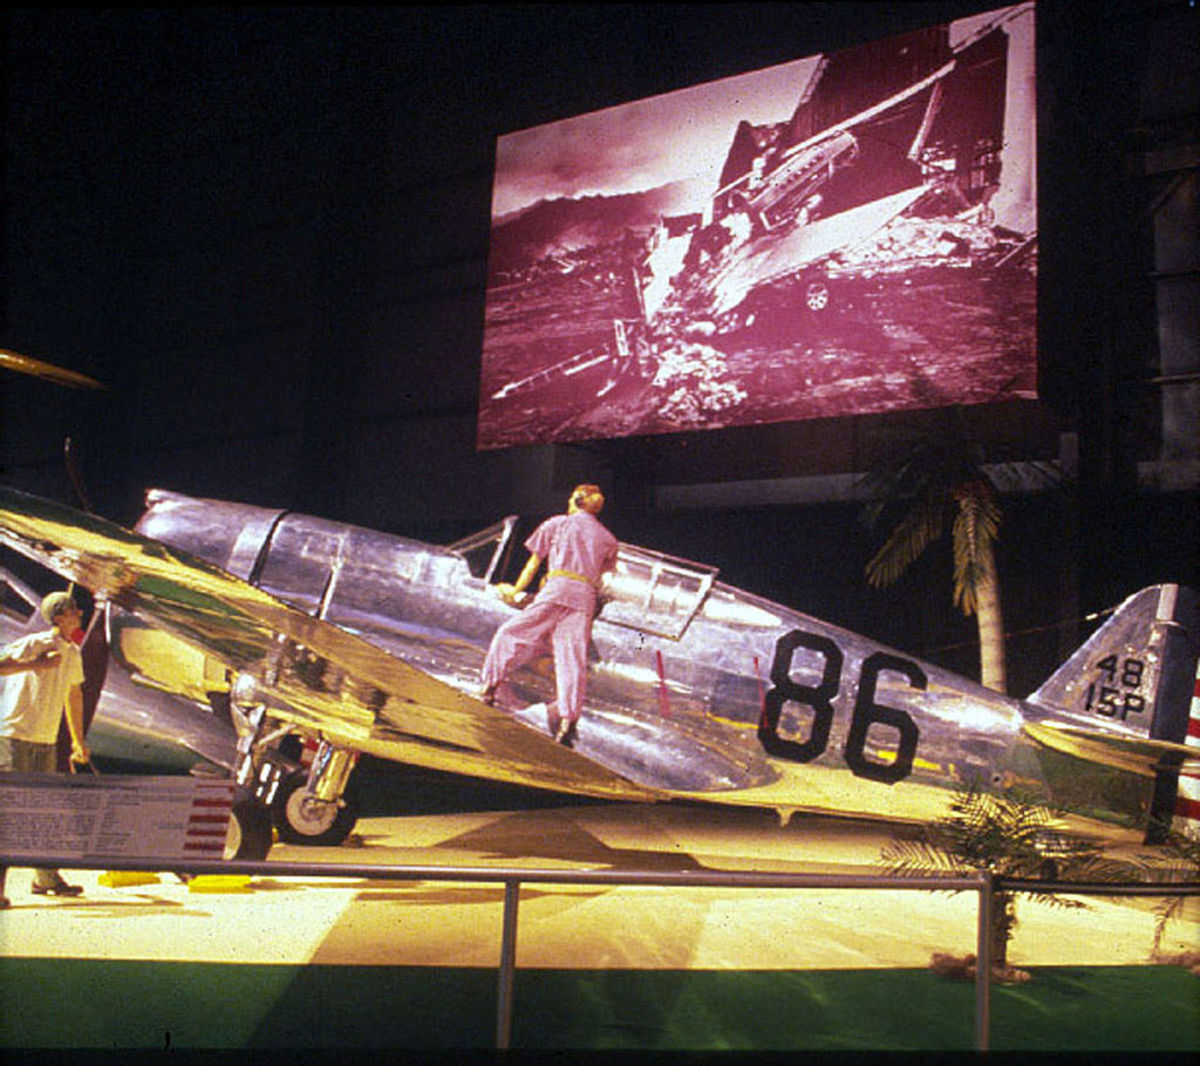 The Curtis P-36A at the USAF Museum a mannequin of Lt. Philip M. Rassmussen.